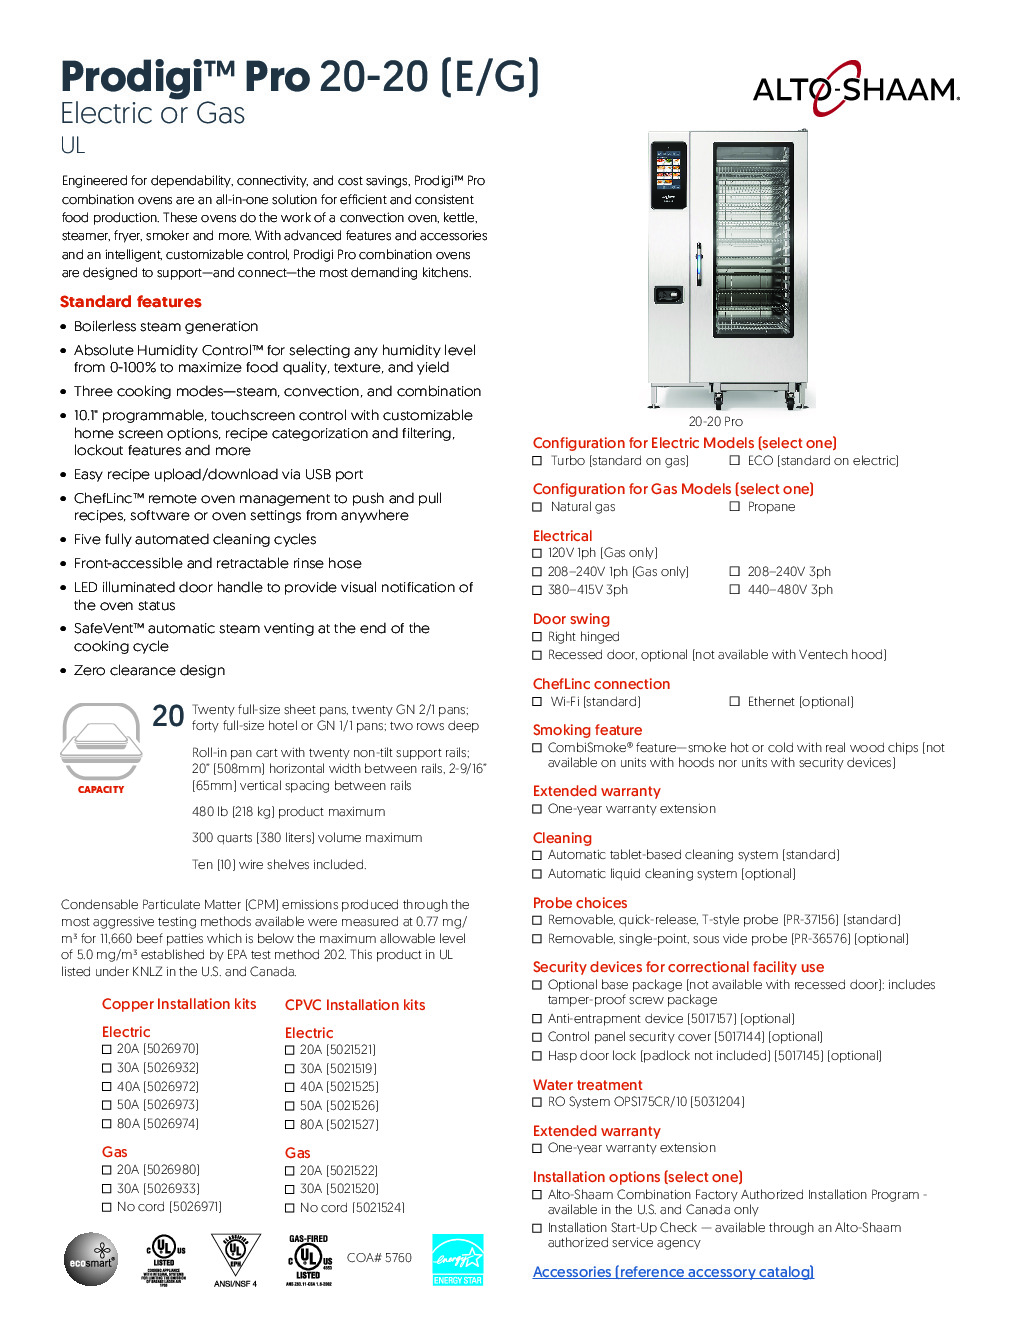 Alto-Shaam 20-20G PRO Gas Combi Oven, Wifi Enabled Controls, 20 Full Size Pan Cap.